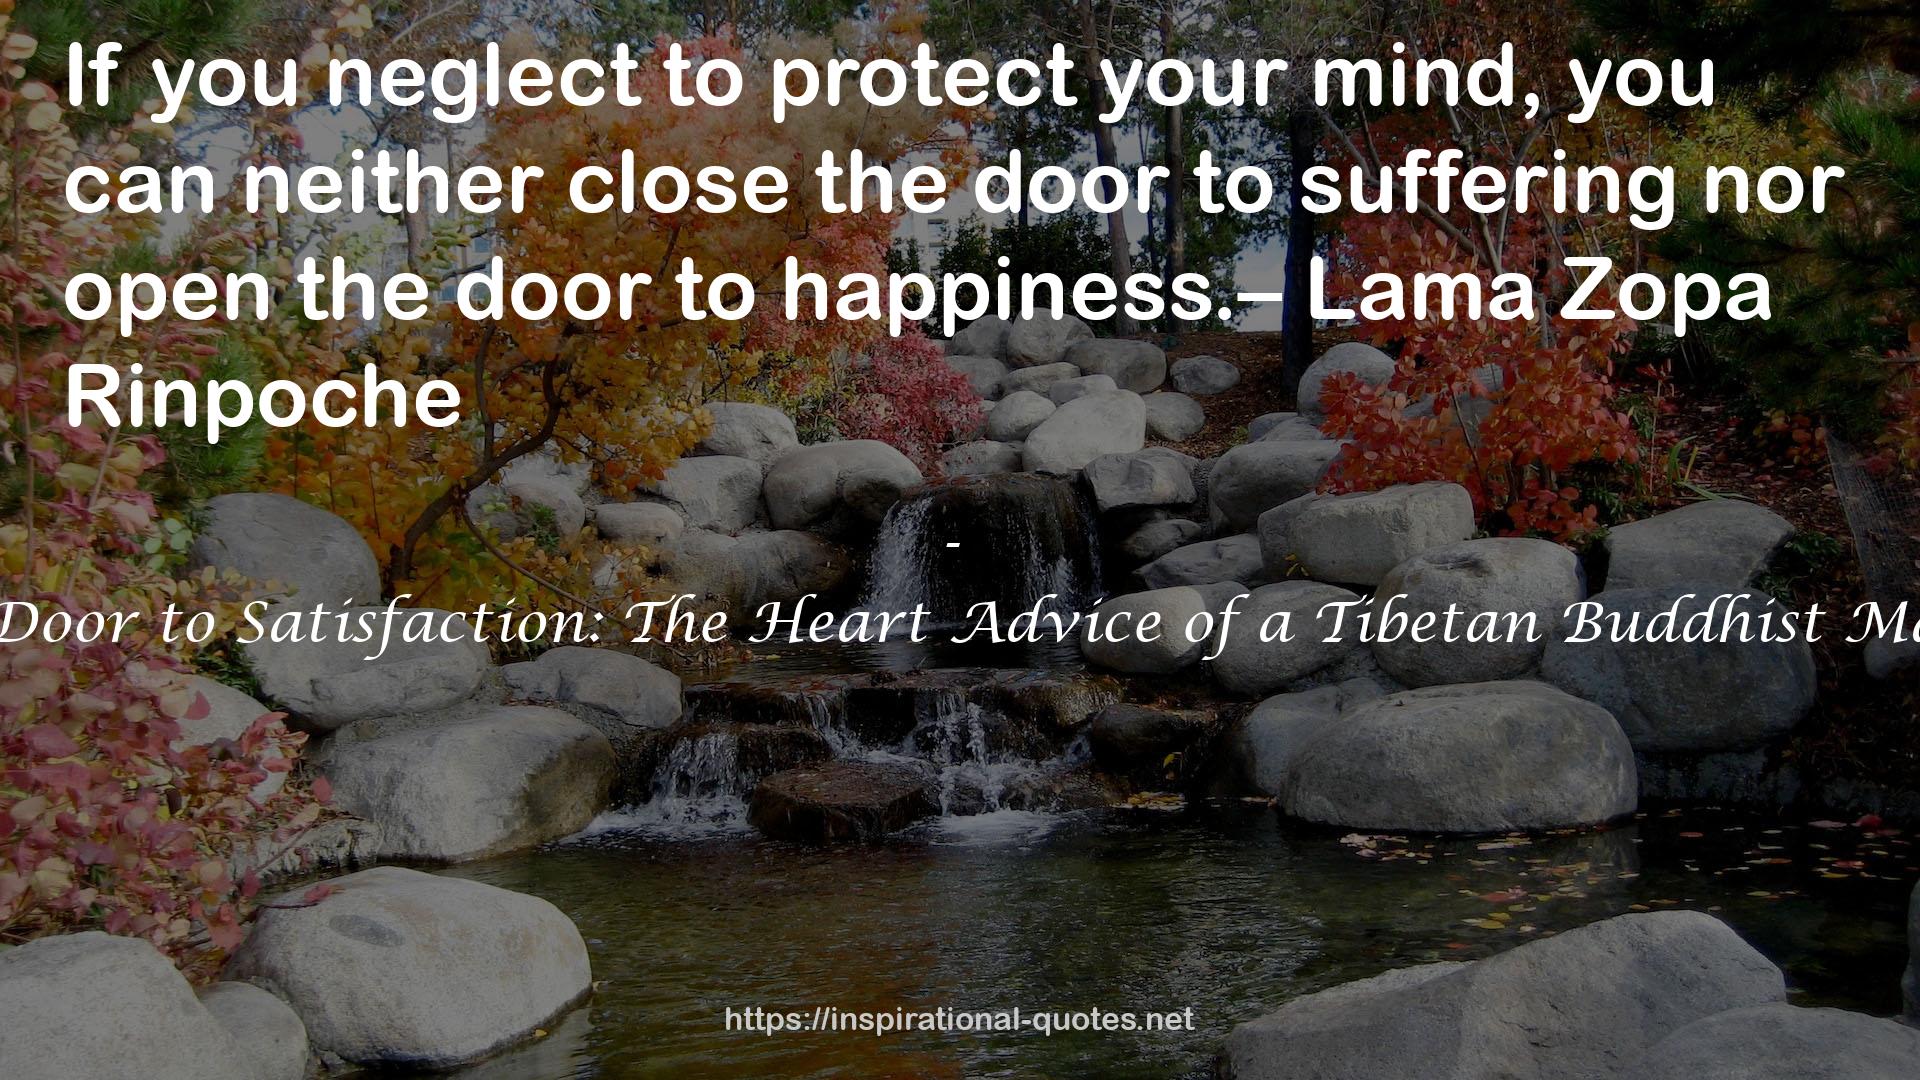 The Door to Satisfaction: The Heart Advice of a Tibetan Buddhist Master QUOTES